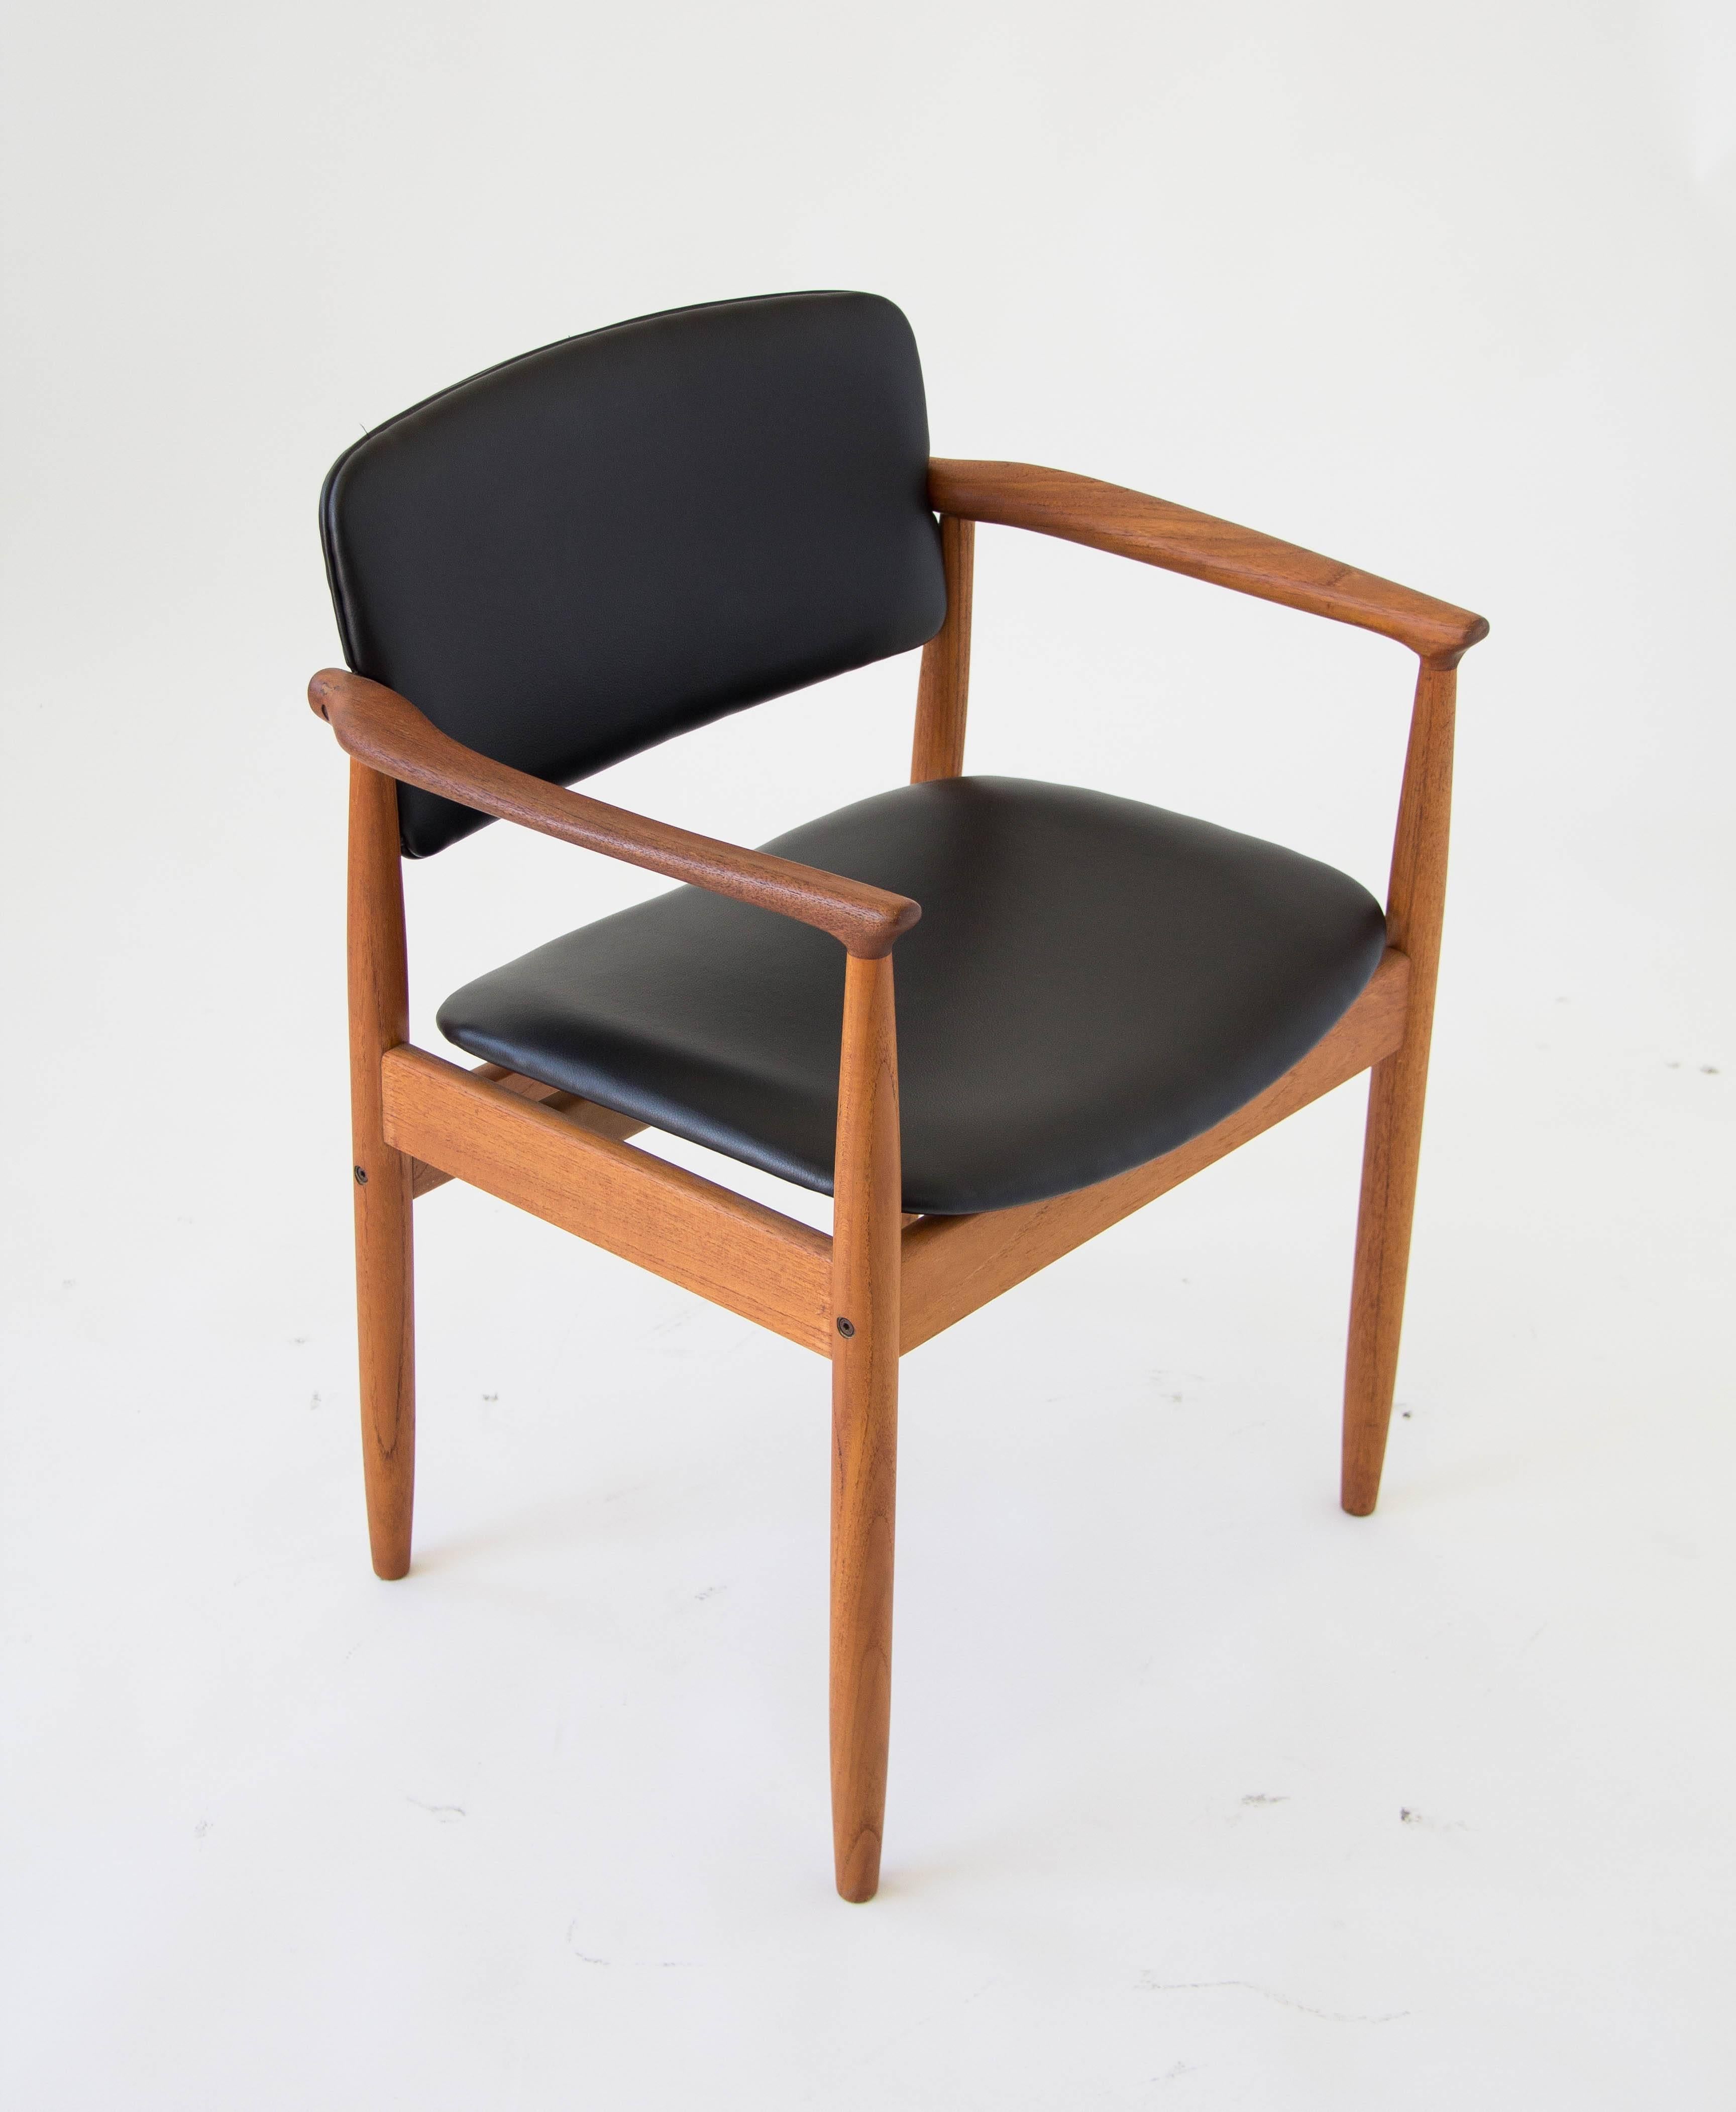 A stamped dining chair from Danish manufacturer Farsø Stolefabrik. The chair has an upholstered seat and backrest in black vinyl and a solid teak frame with curved arms and slightly tapered legs. There are two chairs still available and the listed